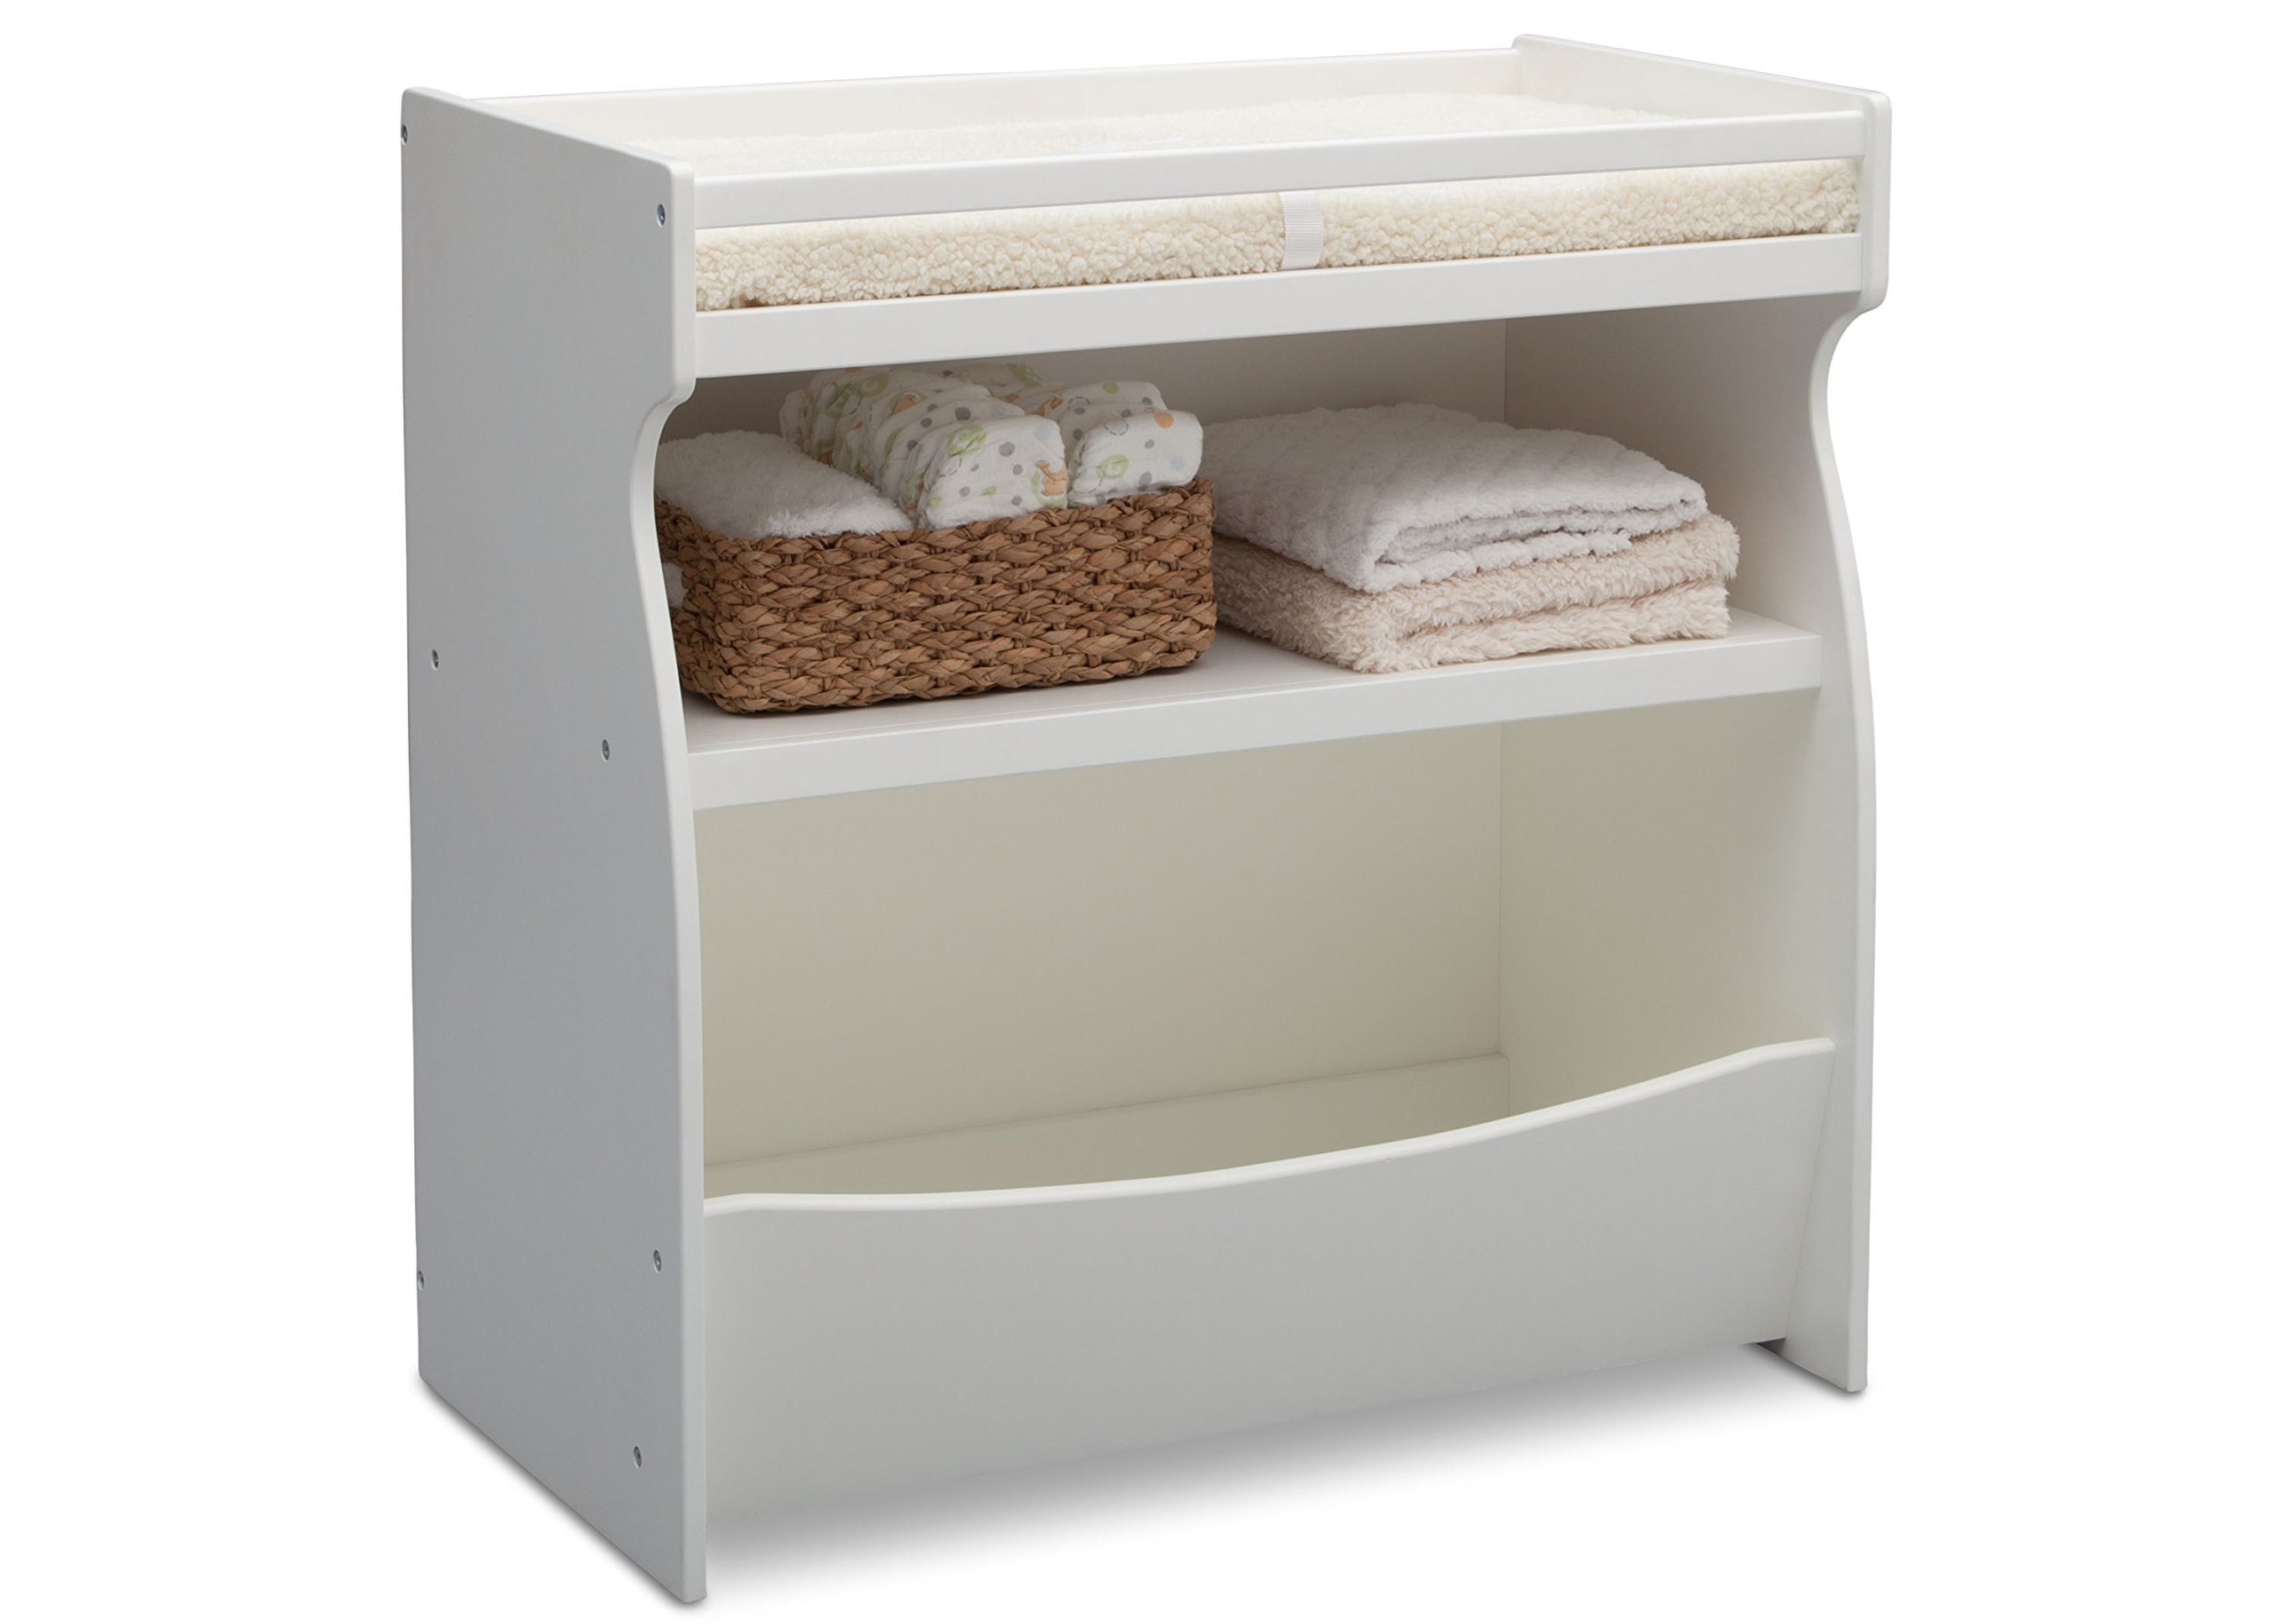 Delta Children 2-in-1 Changing Table and Storage Unit with Changing Pad, Bianca White